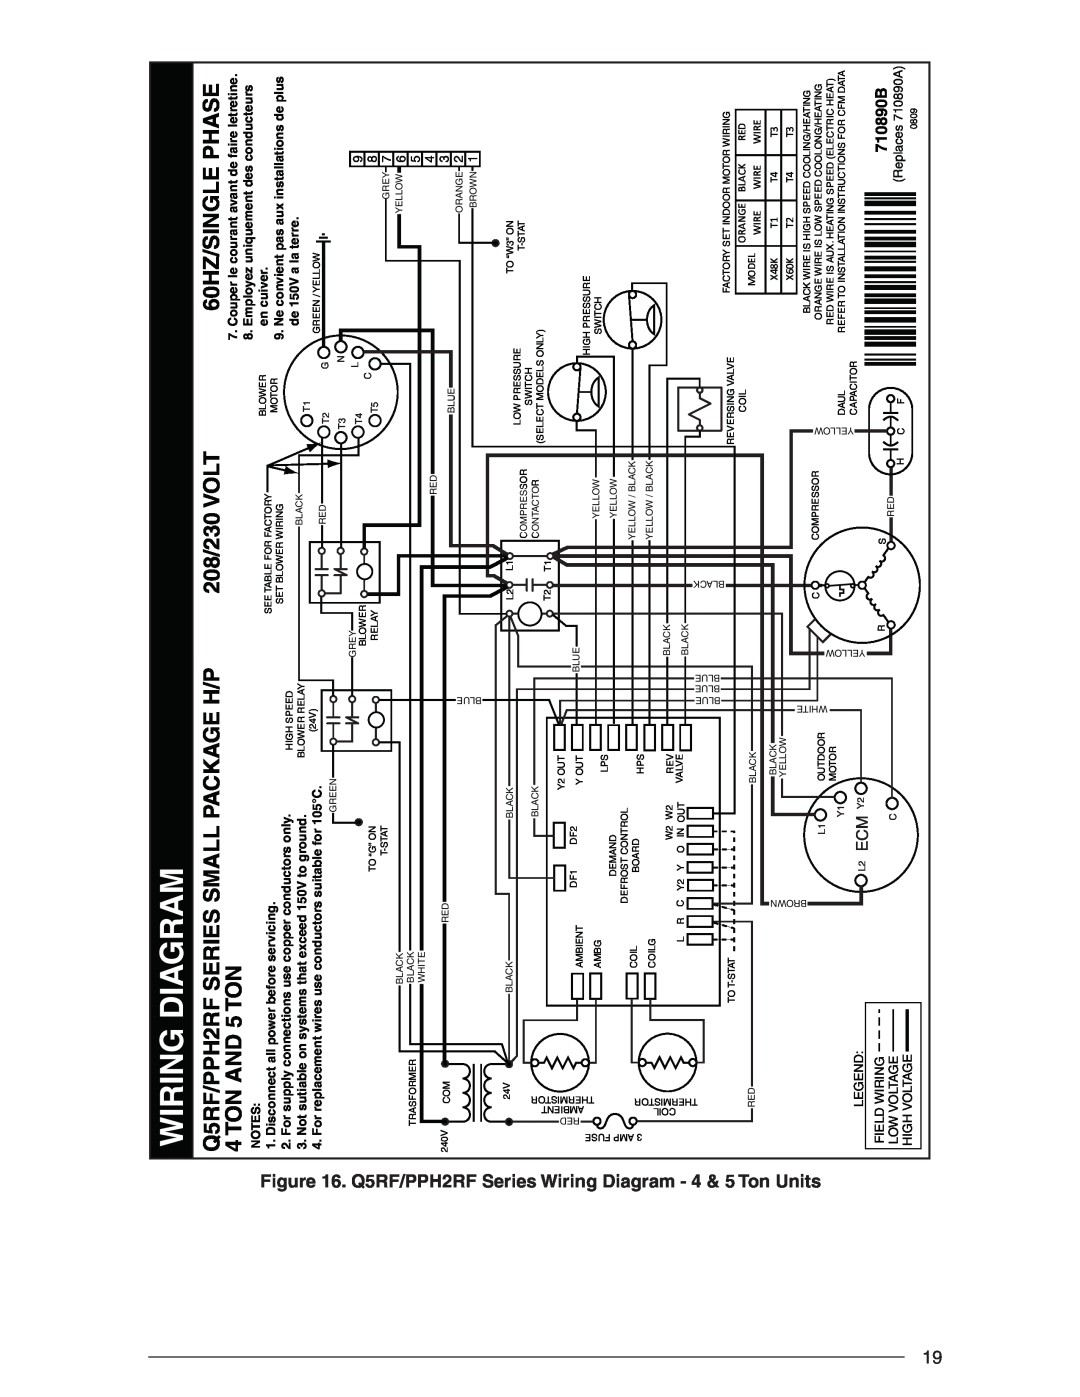 Nordyne R-410A Q5RF/PPH2RF SERIES SMALL PACKAGE H/P, 208/230 VOLT, TON AND 5 TON, Wiring Diagram, 60HZ/SINGLE PHASE 